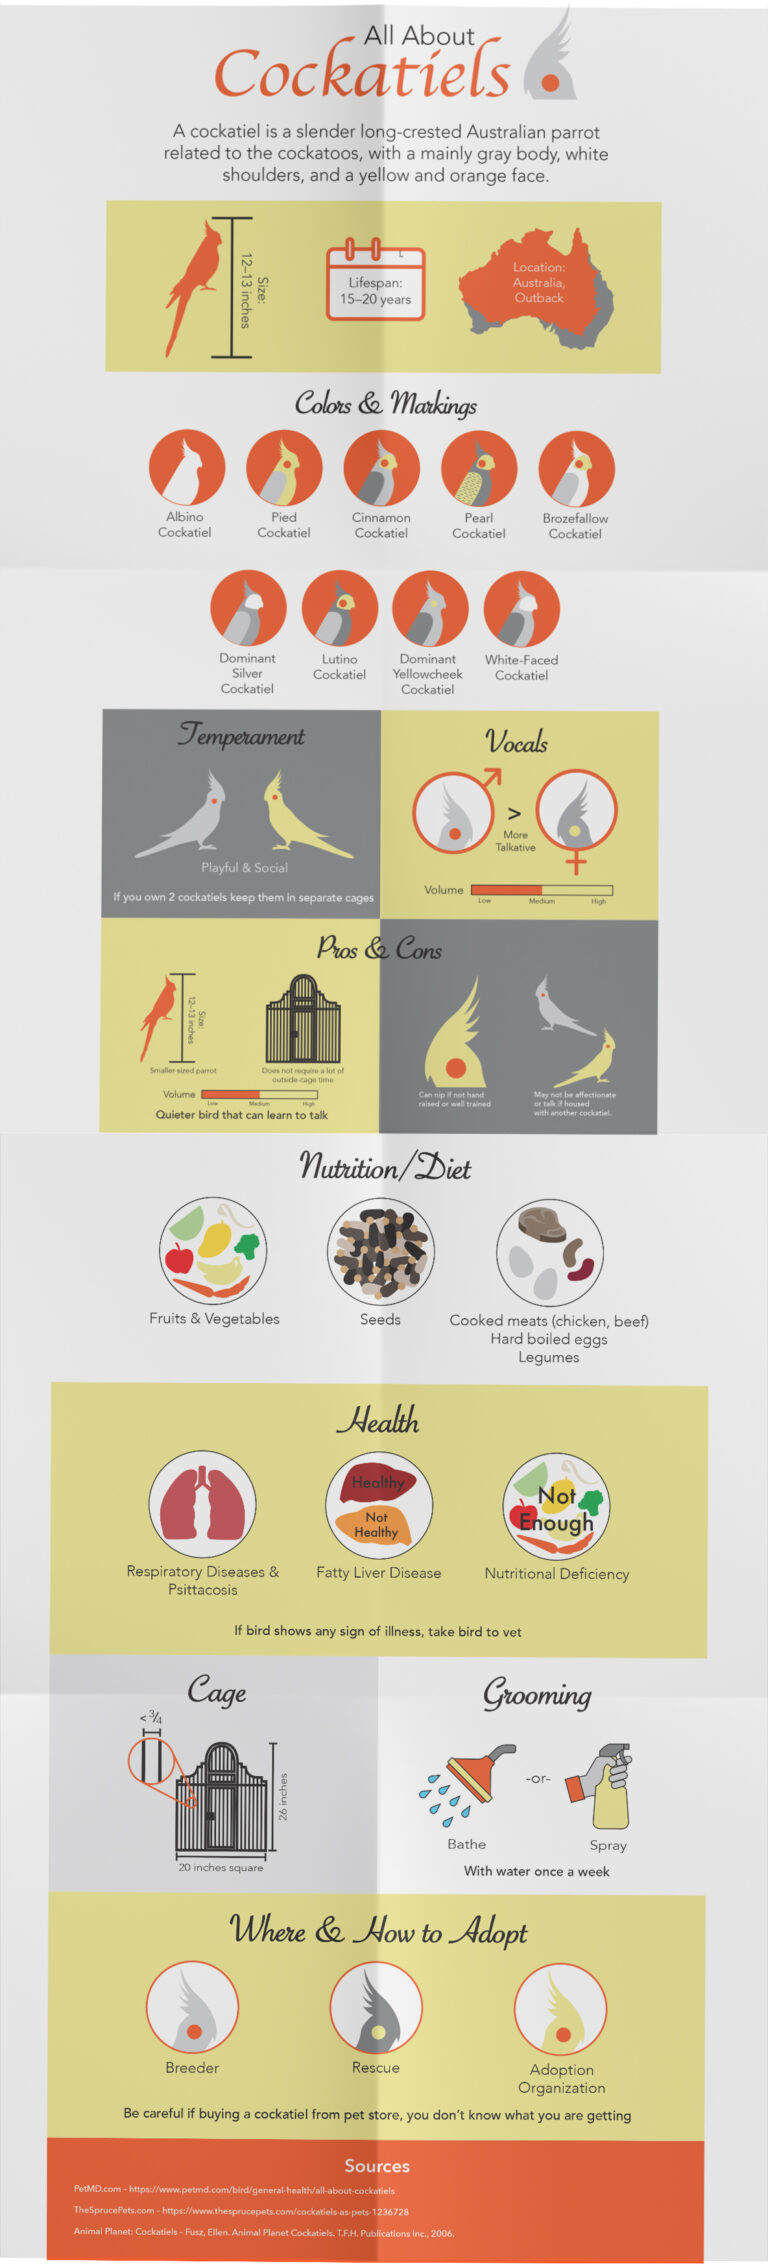 "All About Cockatiels" Infographic Final Version Mockup